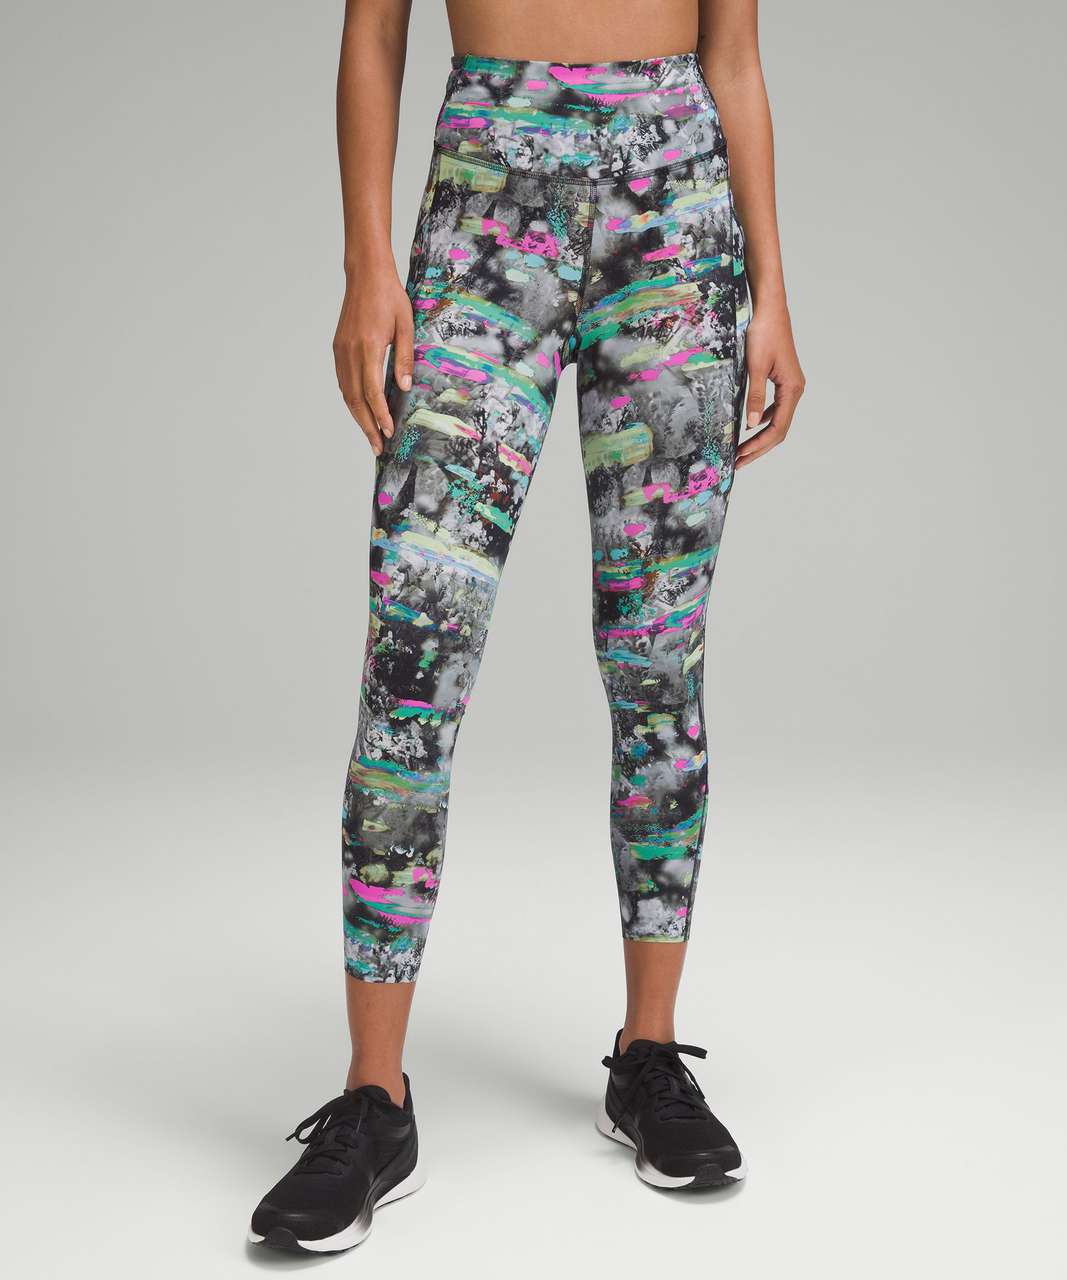 Lululemon Fast and Free High-Rise Tight 25" *Pockets - Paint Drift Multi